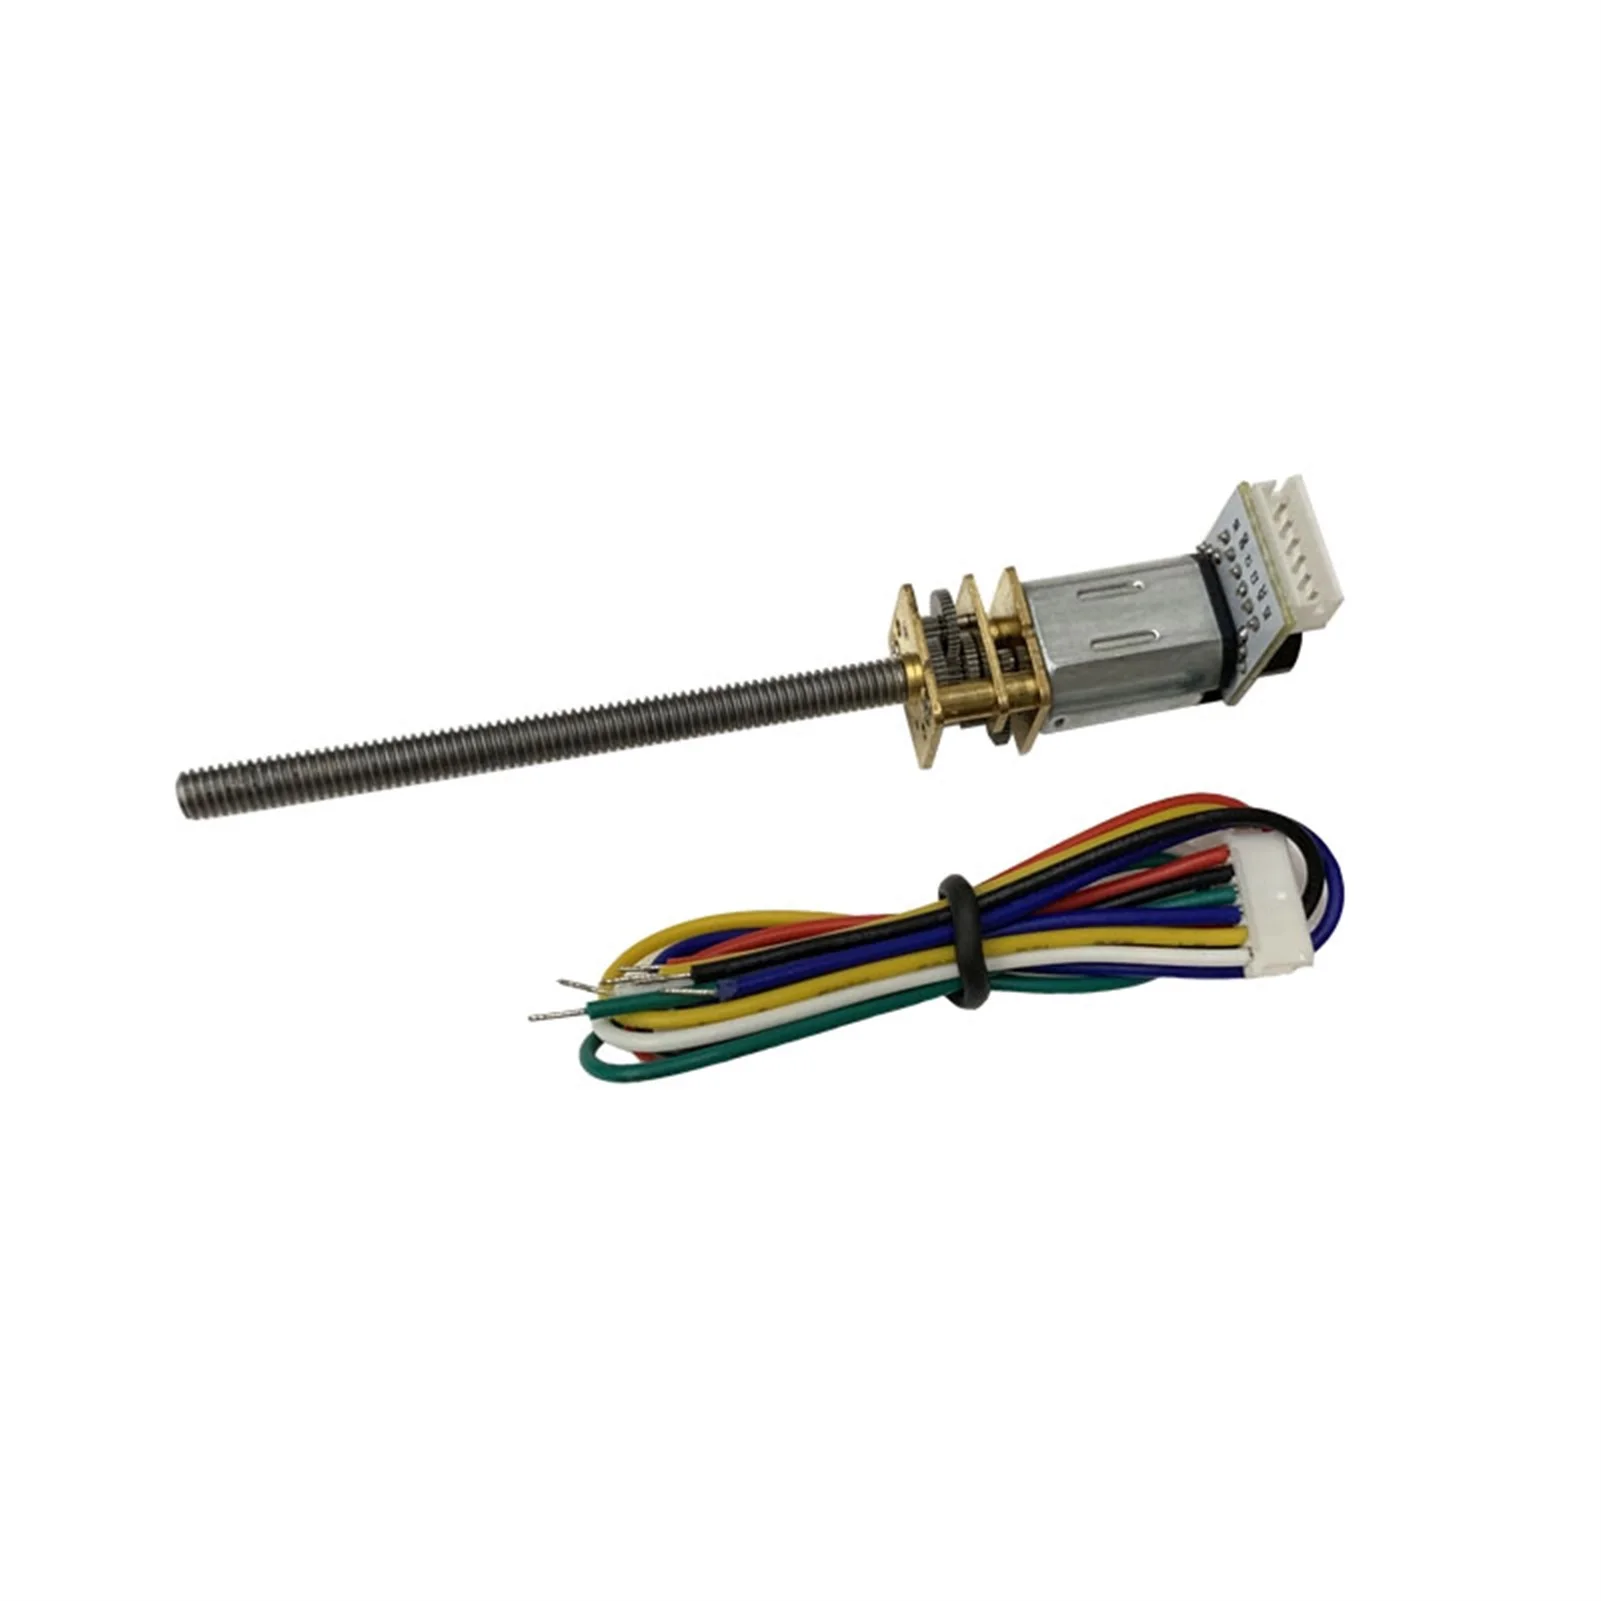 

N20 M4*55mm Shaft Geared Motor, 6V 10RPM Low-speed Micro Motor with 12mm Gearbox 1:12 Pulse Hall Precision Encoder